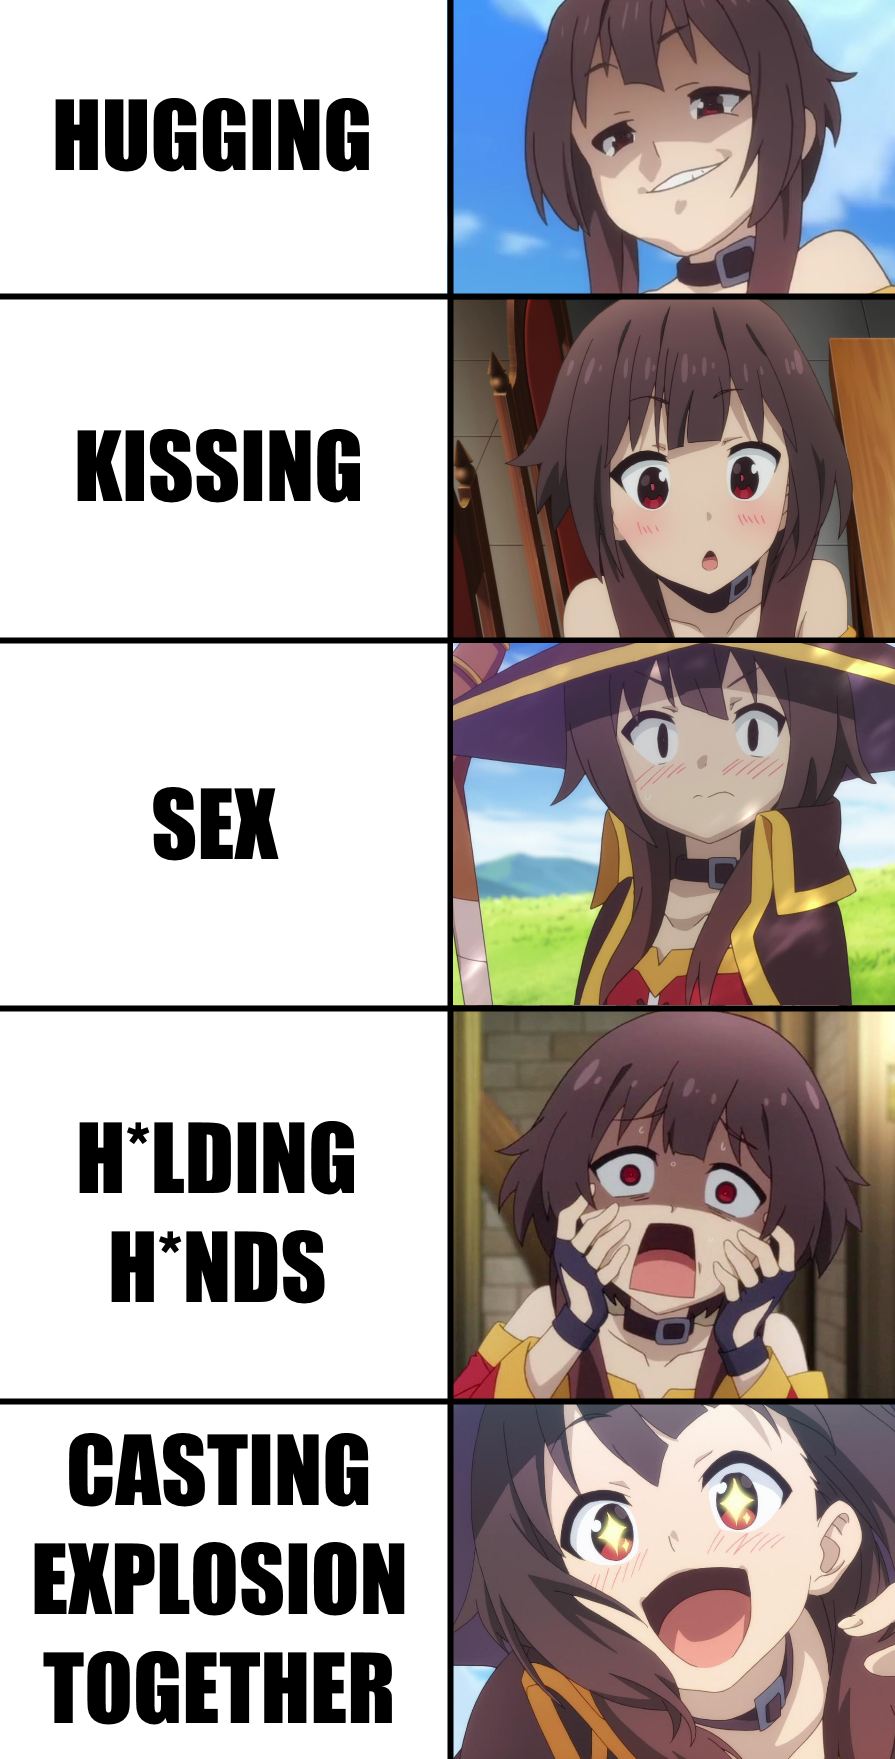 Megumin's reaction to the idea of ...